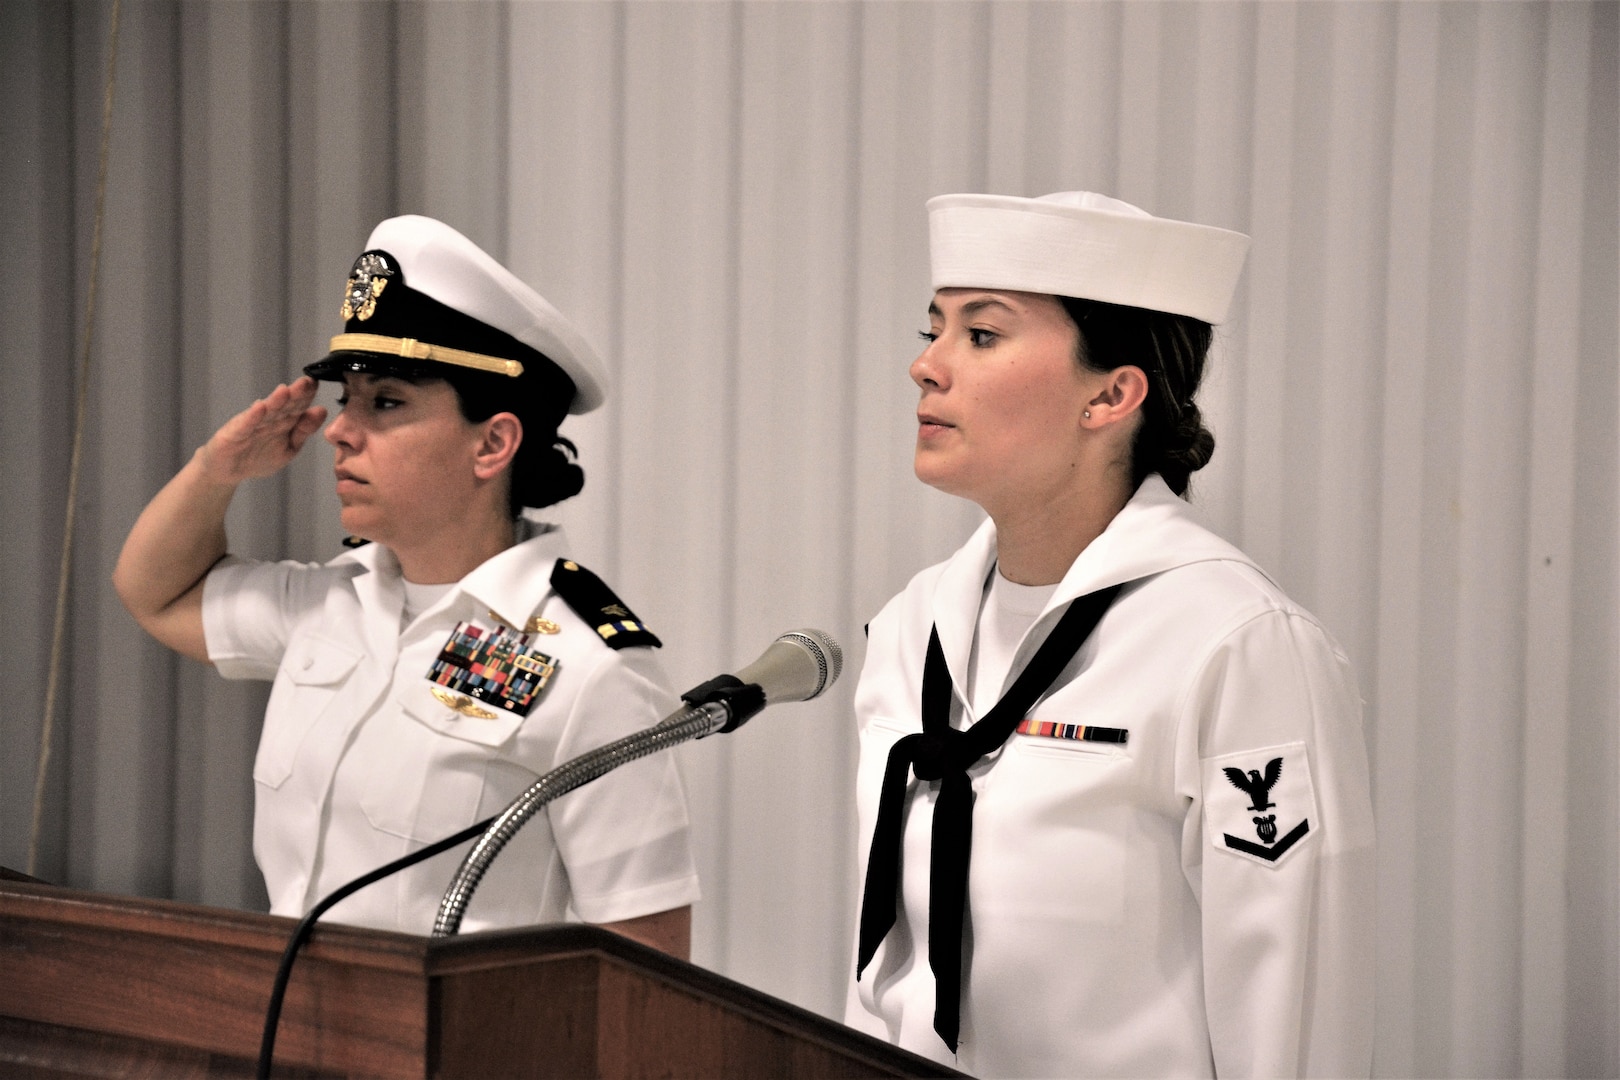 IMAGE: (Left to right) Chief Warrant Officer Josephine Leon, master of ceremony, renders a salute prior to Musician 3rd Class Amanda Huddleston, Fleet Forces Band, singing the national anthem. More than 200 Sailors and guests attended a traditional change of command ceremony at Naval Air Station (NAS) Oceana’s Center for Naval Aviation Technical Training Unit’s ceremonial hangar aboard NAS Oceana June 27 where Cmdr. Andrew Hoffman was relieved of command by Cmdr. Joseph Oravec. Oravec became the 28th commanding officer, Naval Surface Warfare Center Dahlgren Division, Dam Neck Activity.